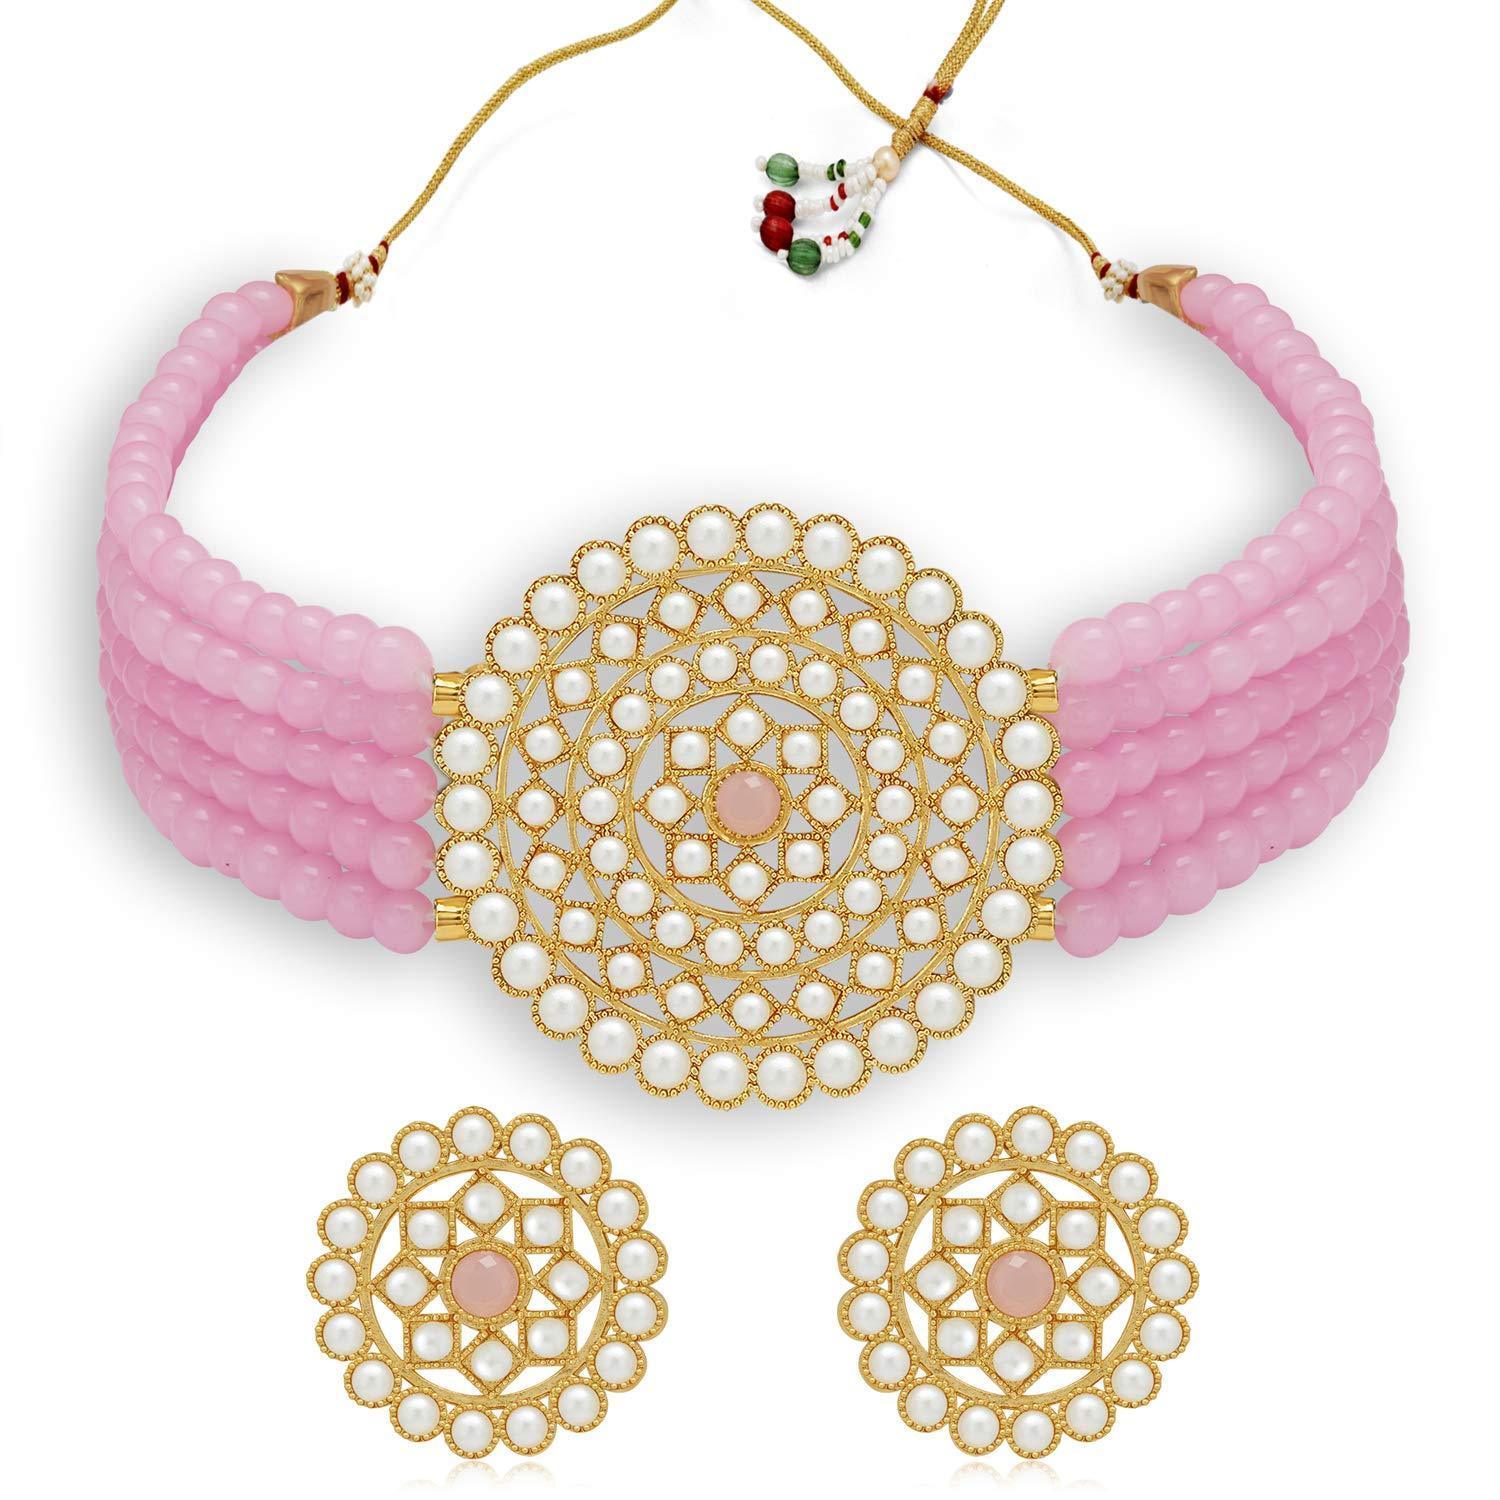 Women's Gold Plated Pink Light Weight Pearl Beaded Choker Necklace Set - i jewels